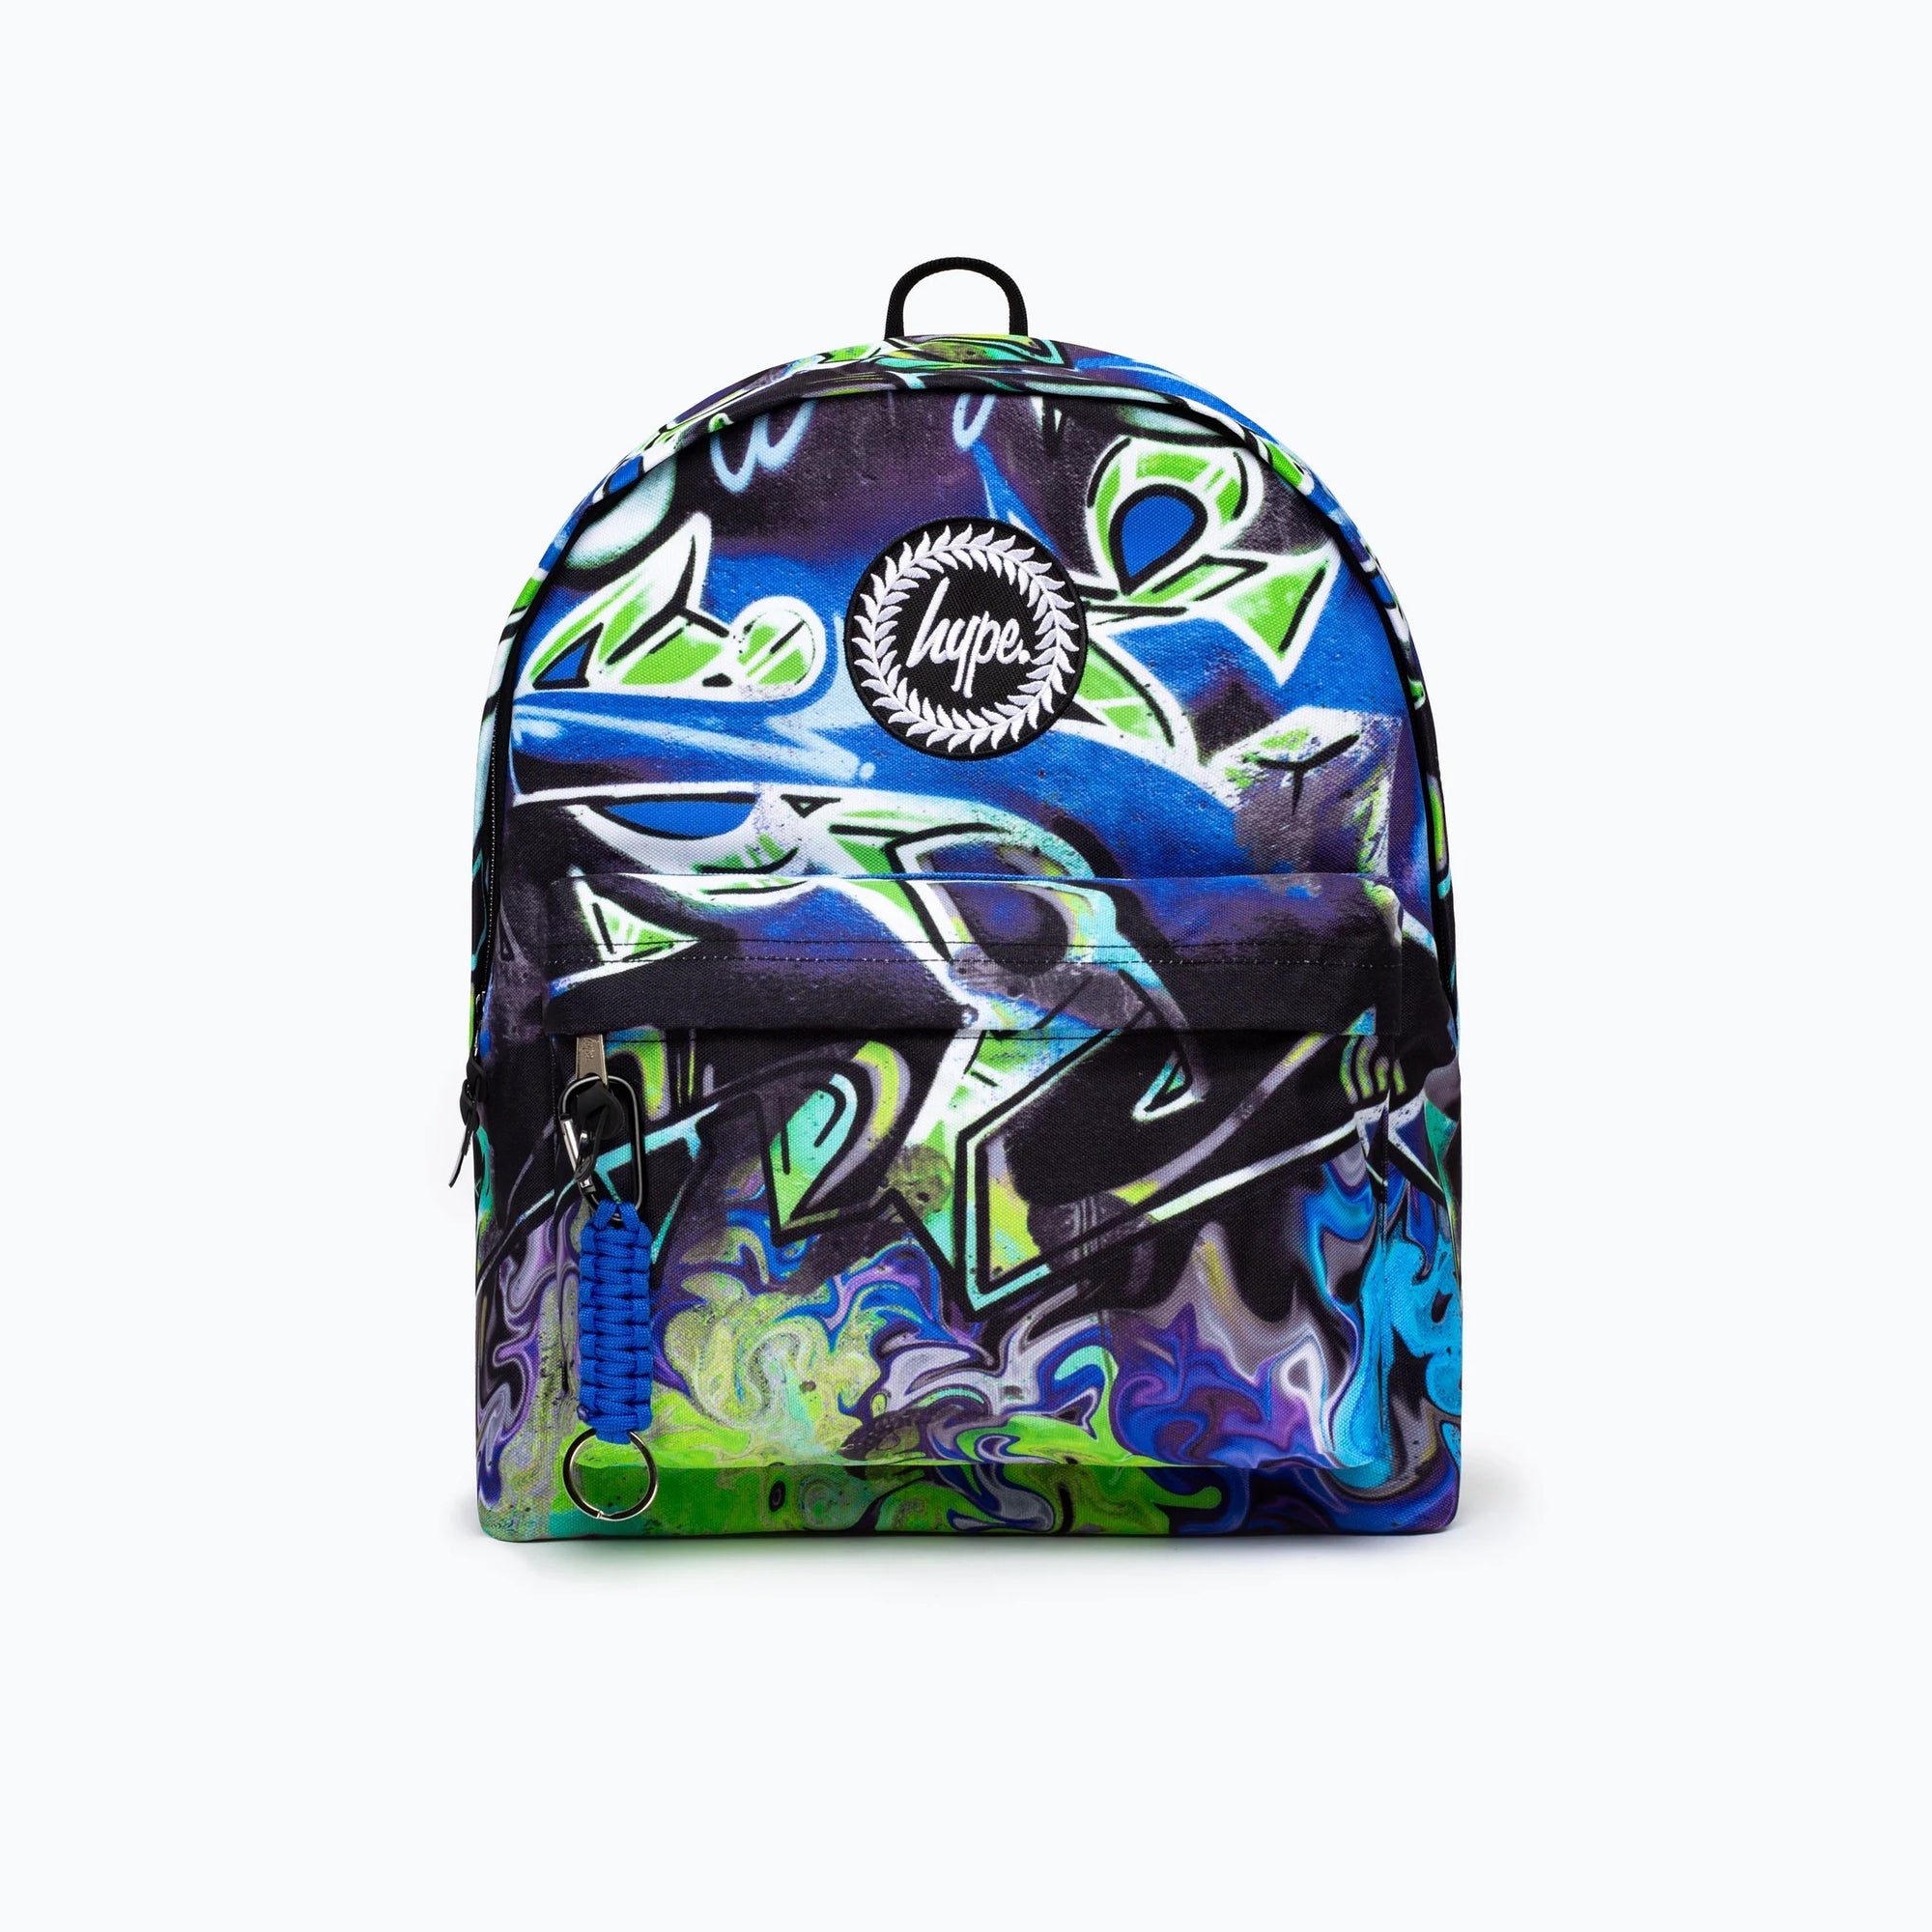 Hype Blue Graffiti Backpack Xucb-059 Accessories ONE SIZE / Blue